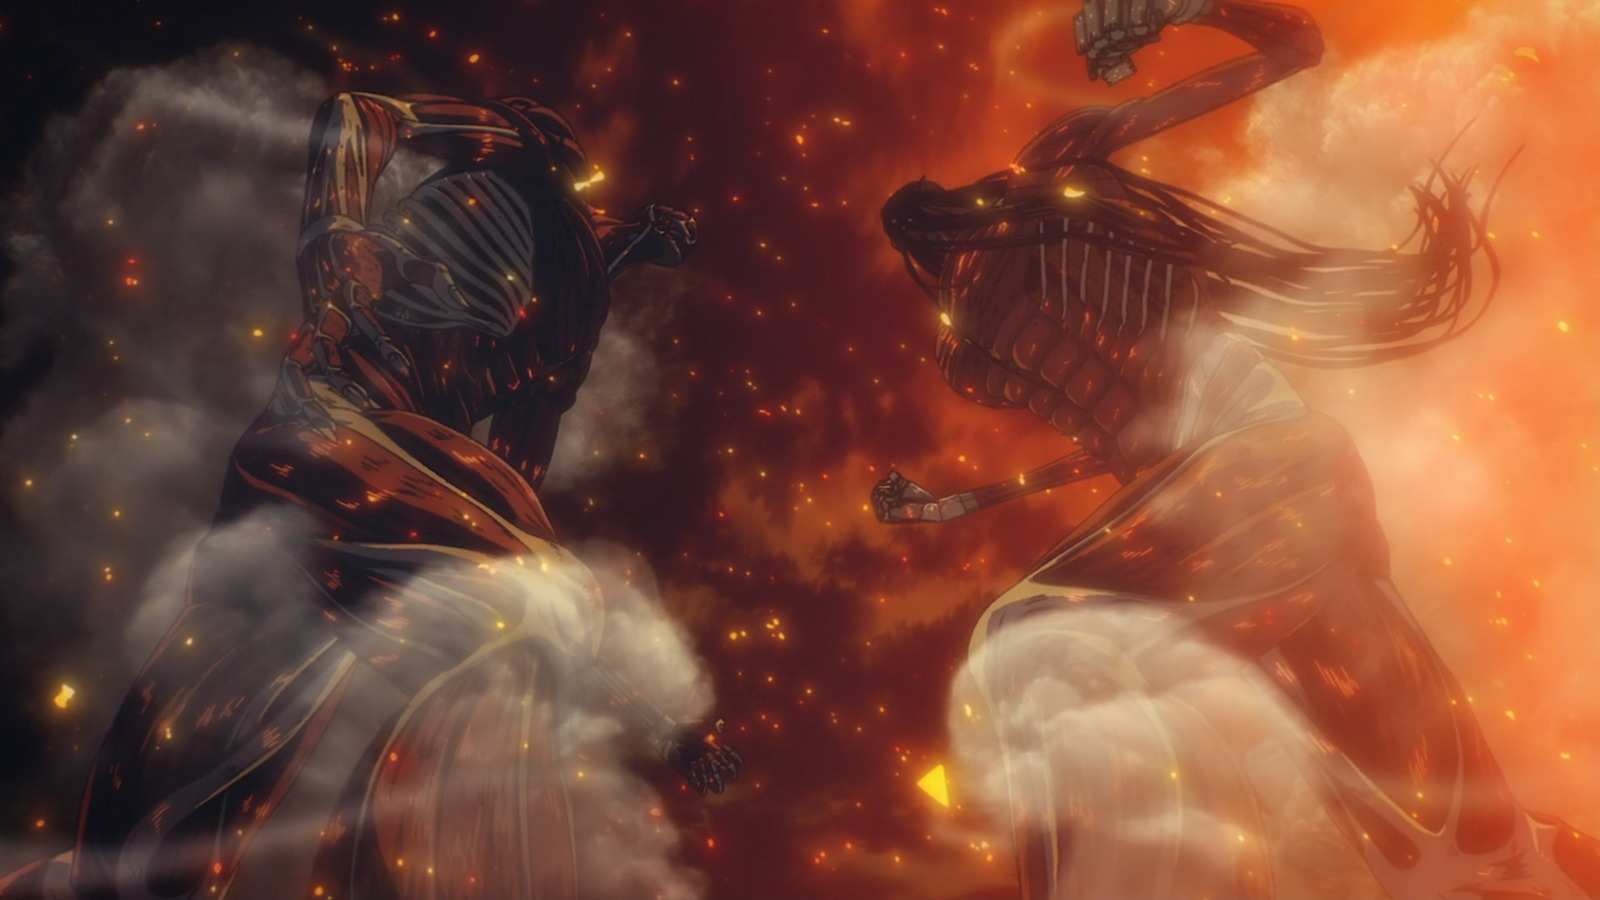 Attack On Titan Ending Explained: The Epic Anime Gets The Ending It Deserves